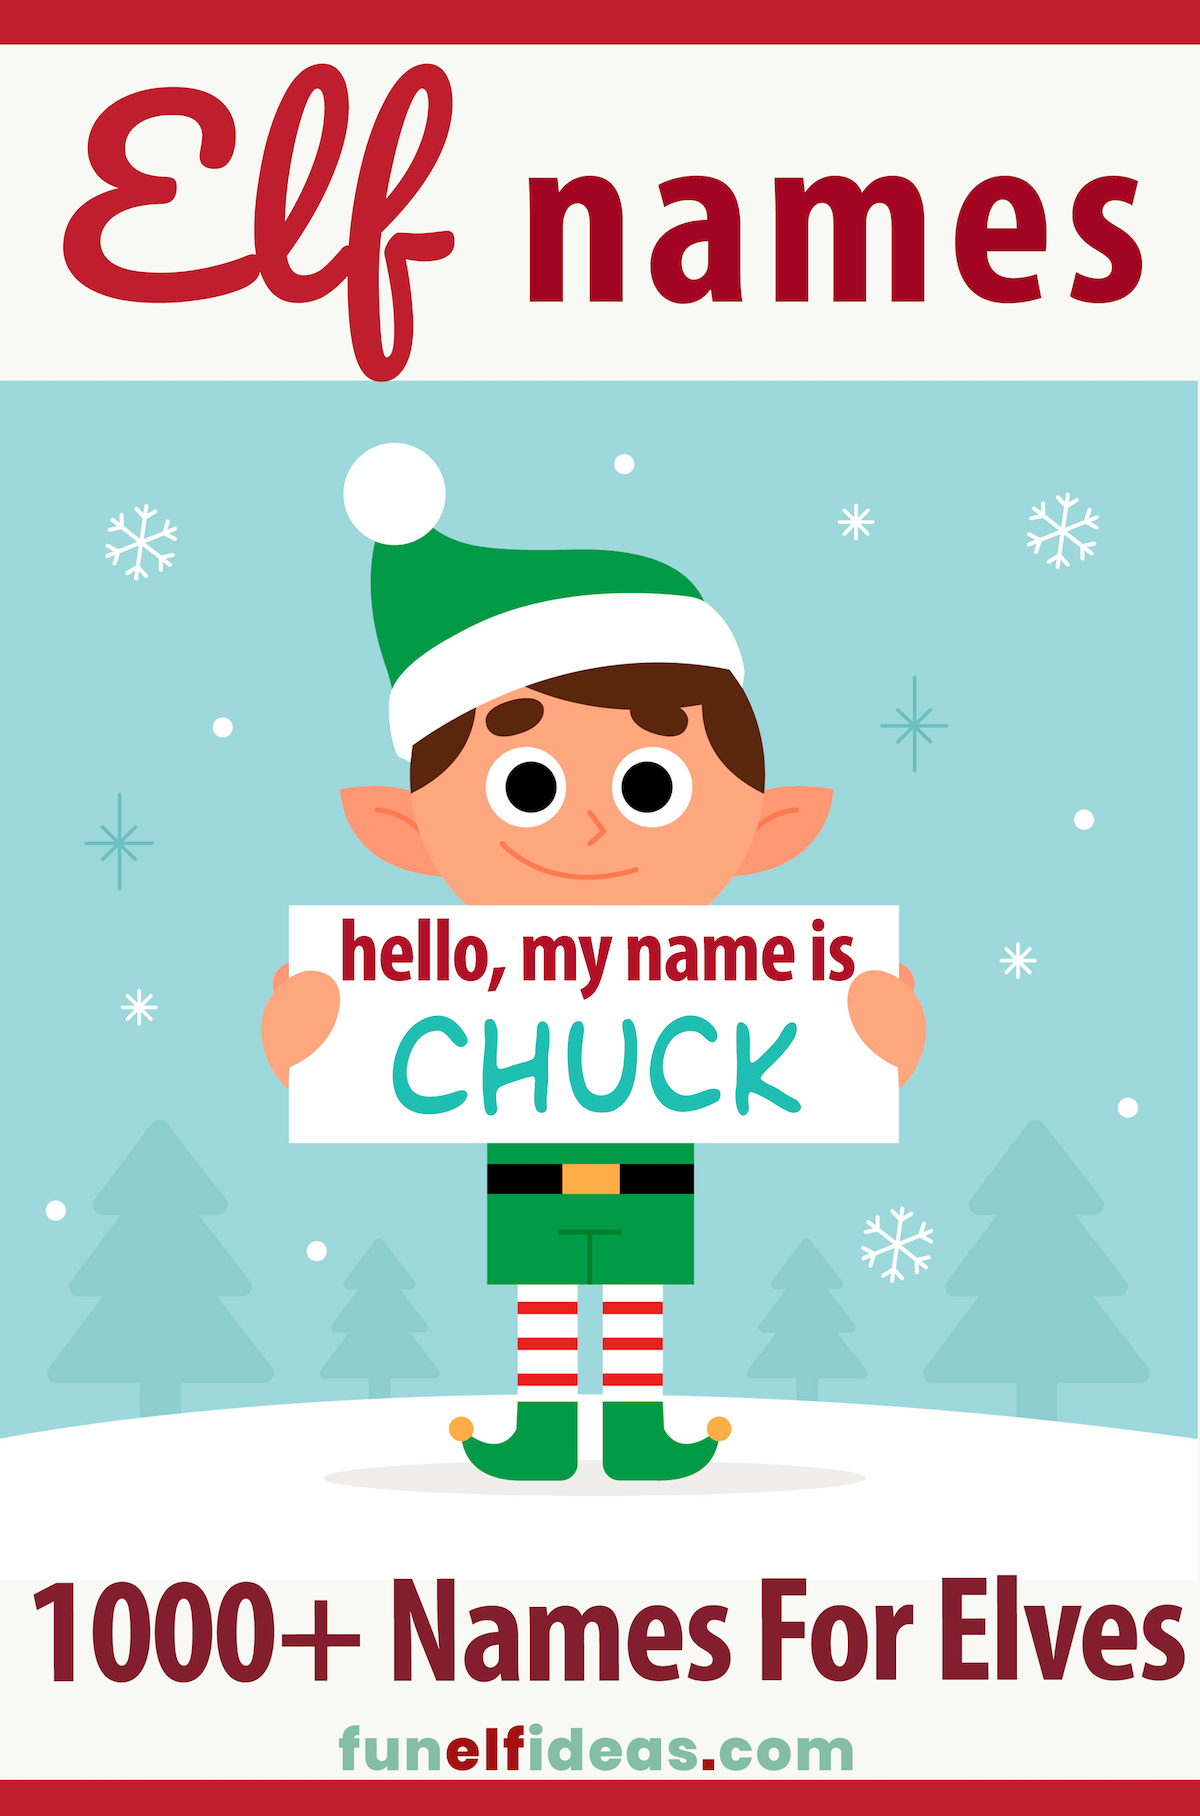 Illustration of an elf holding a sign saying "Hello, My Name Is Chuck." with text overlay "Elf Names: 1000+ names for elves from fun elf ideas.com"